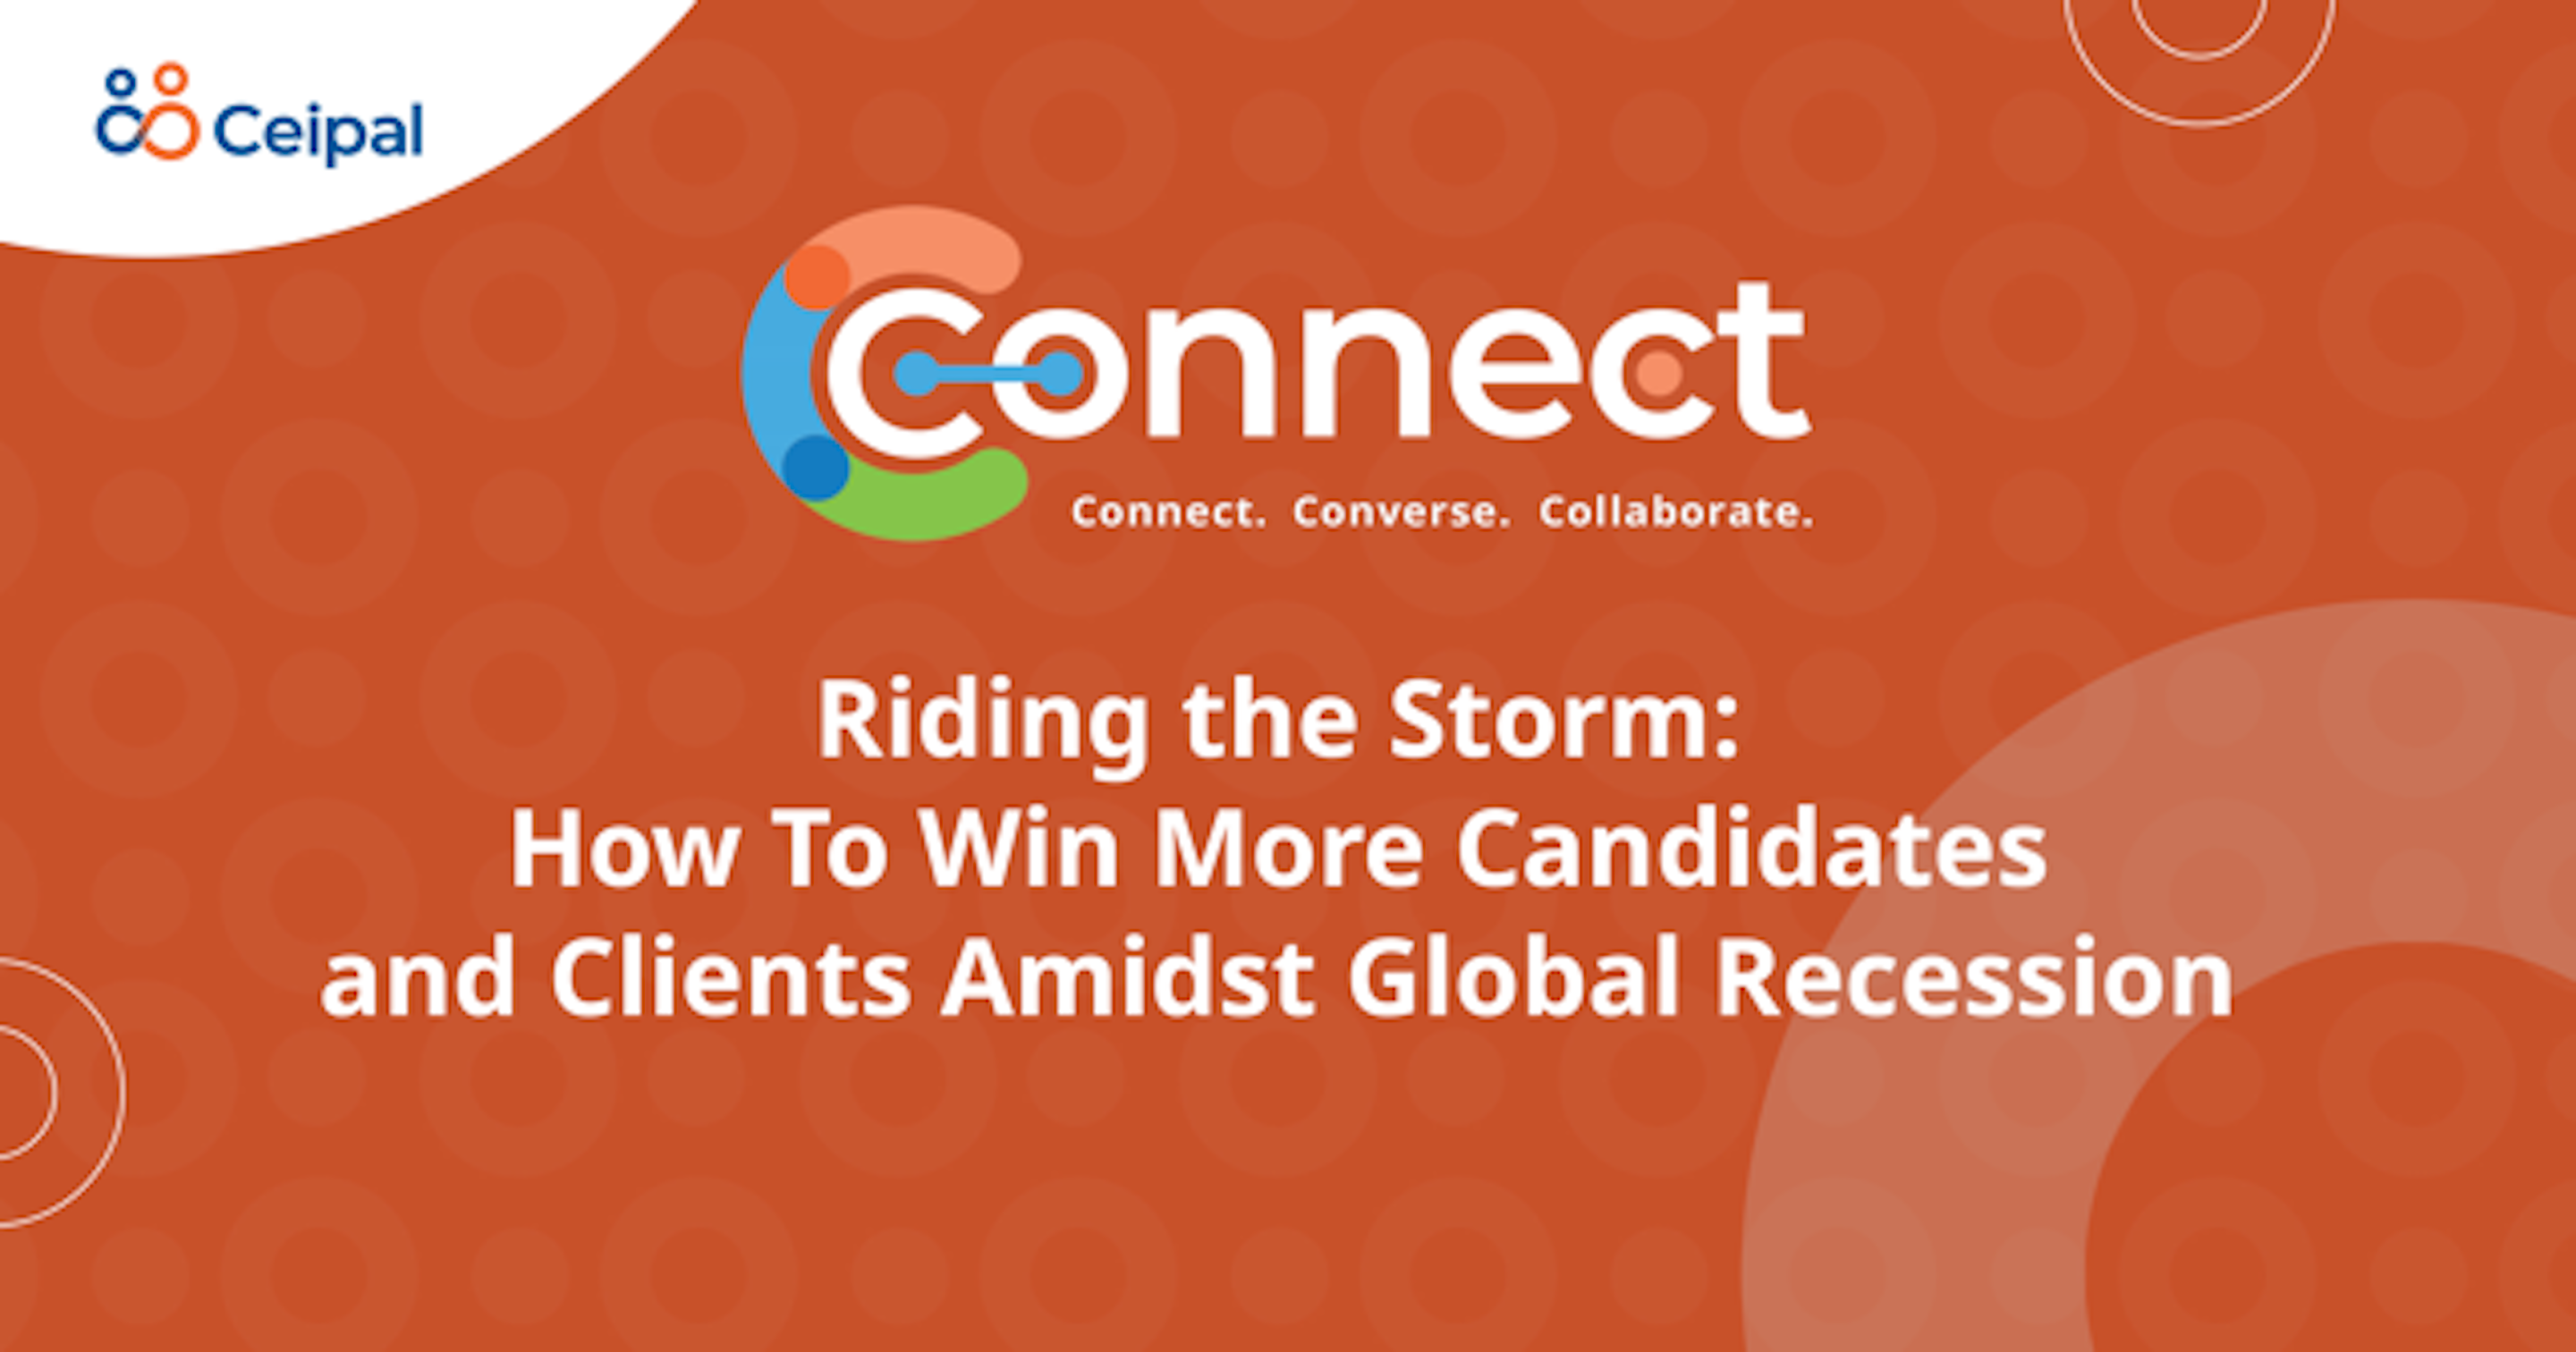 India Session 1: Riding the Storm: How To Win More Candidates and Clients Amidst Global Recession